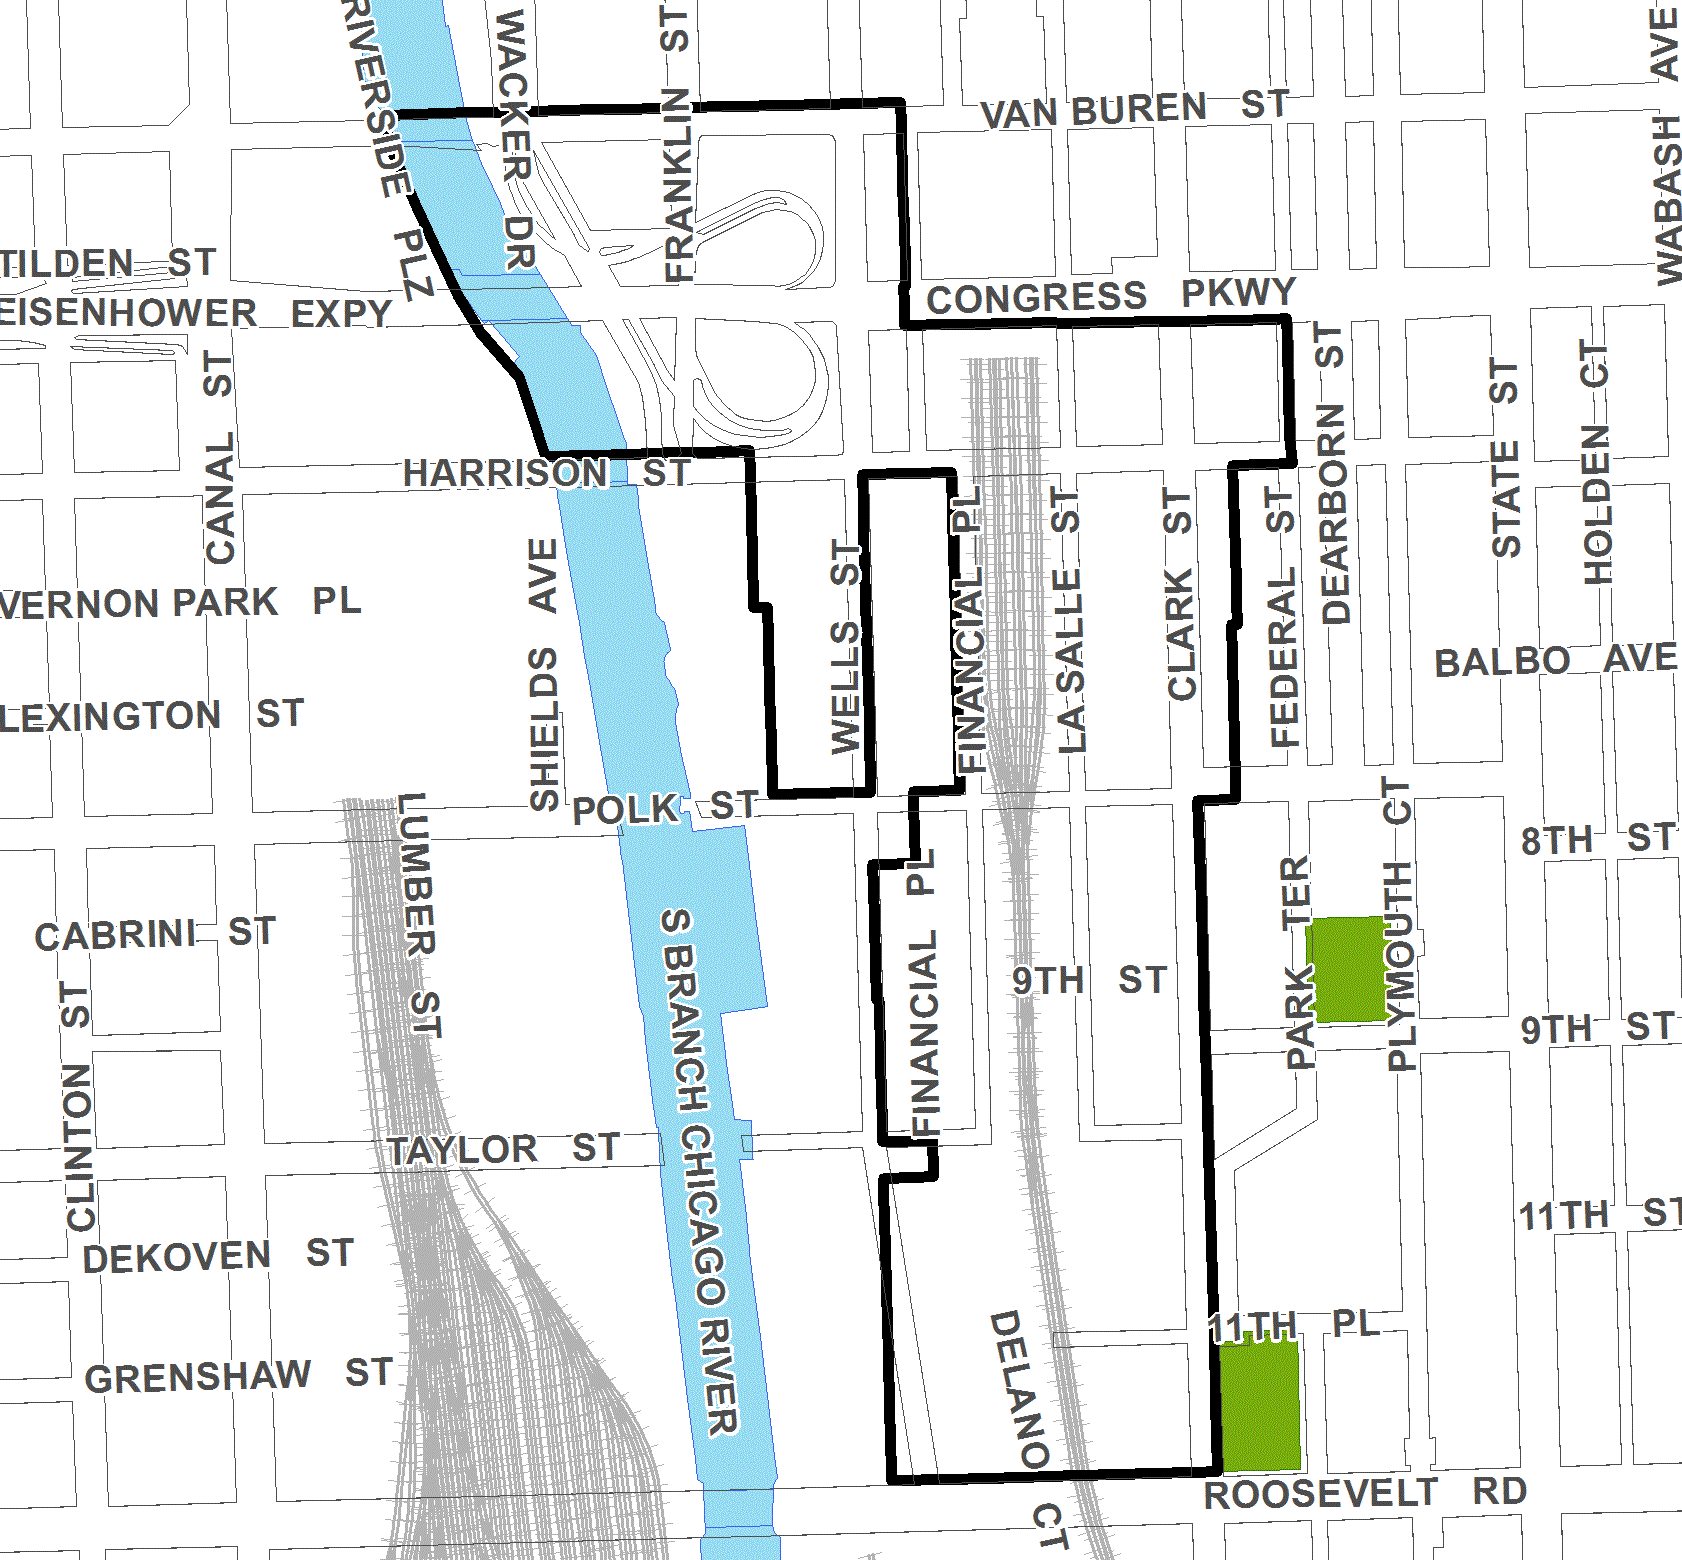 River South TIF district map, roughly bounded on the north by Van Buren Street, Cullerton Street on the south, State Street on the east, and the Chicago River on the west.